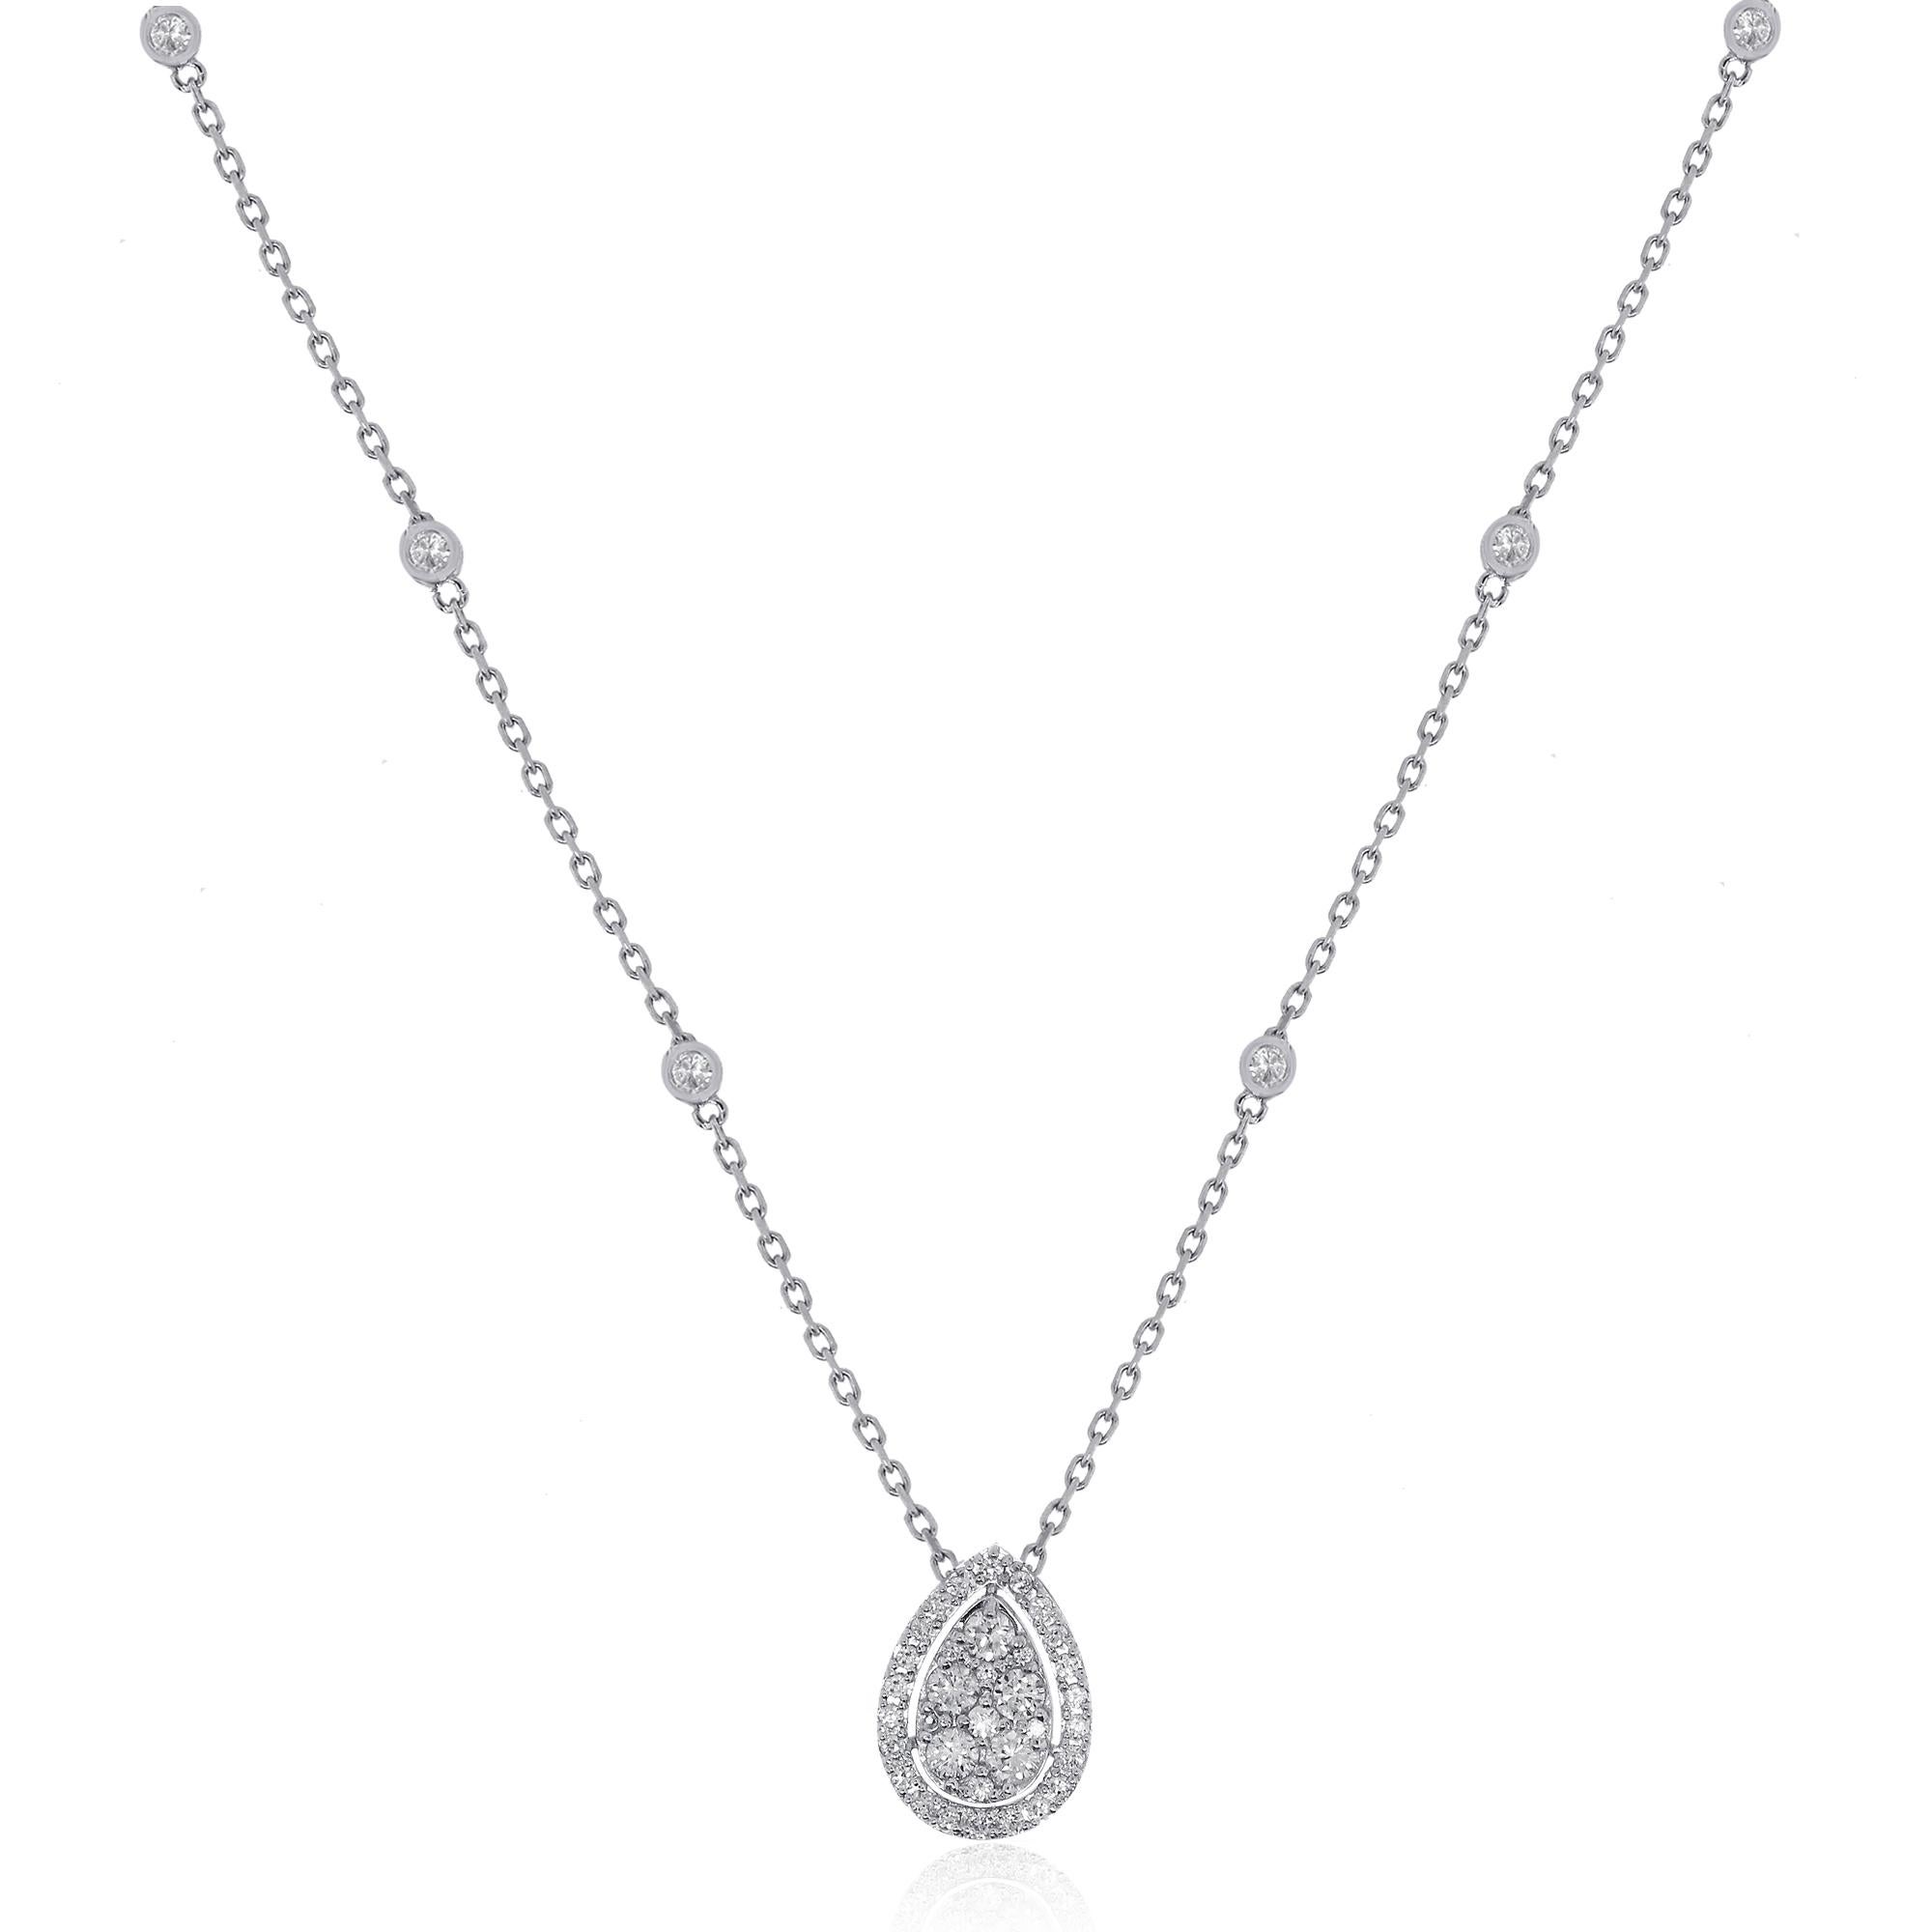 Material: 18k White Gold
Diamond Details: Approximately 0.67ctw of round brilliant diamonds. Diamonds are G in color and SI in clarity.
Necklace Length: 18″
Clasp: Lobster Clasp
Total Weight: 2.6g (4.1dwt)
SKU: G9636